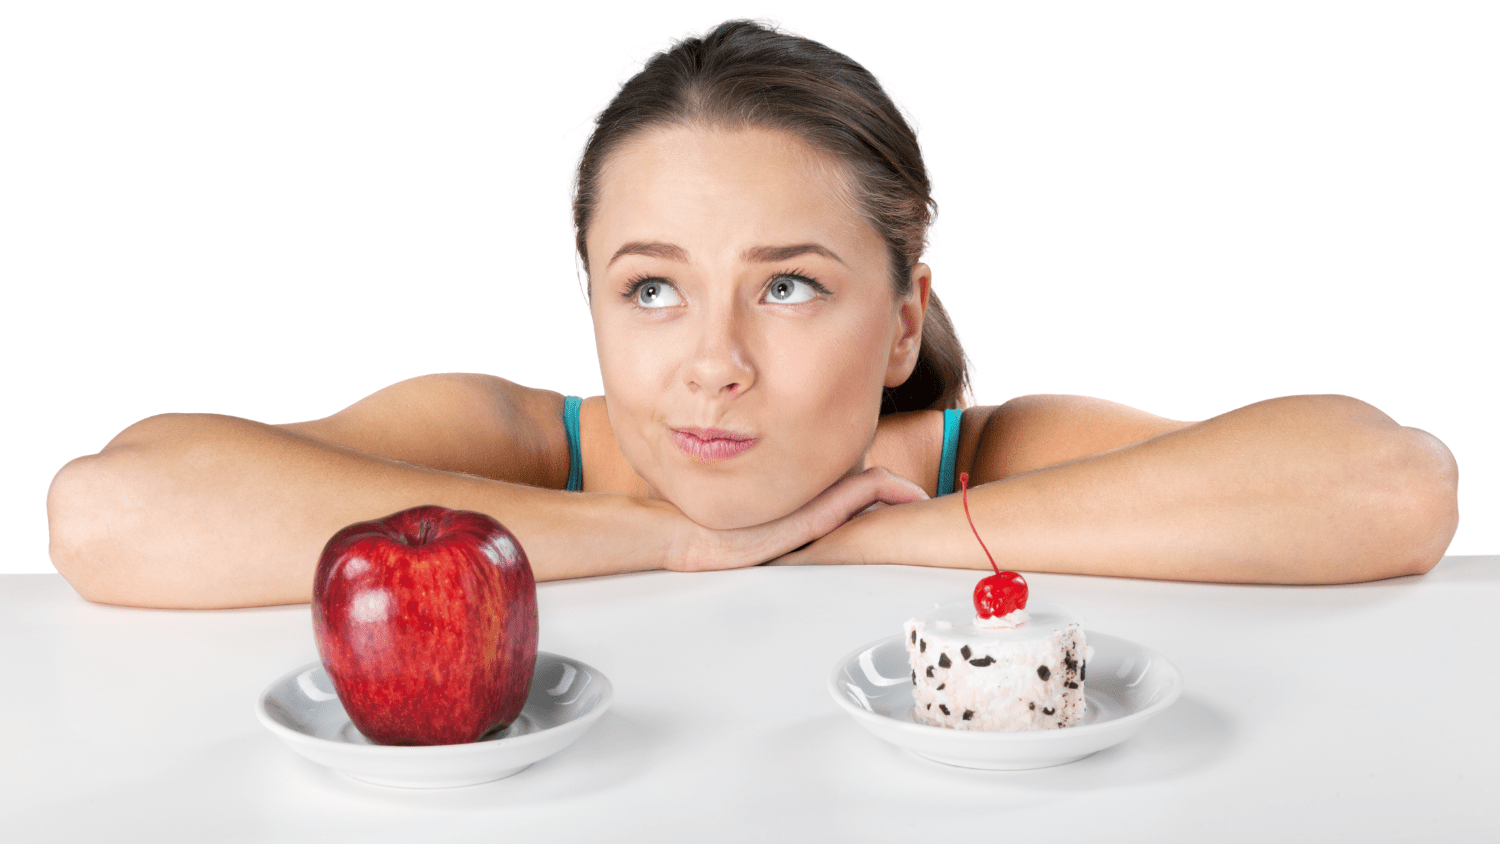 Develop Diet Self Control With These Simple Steps